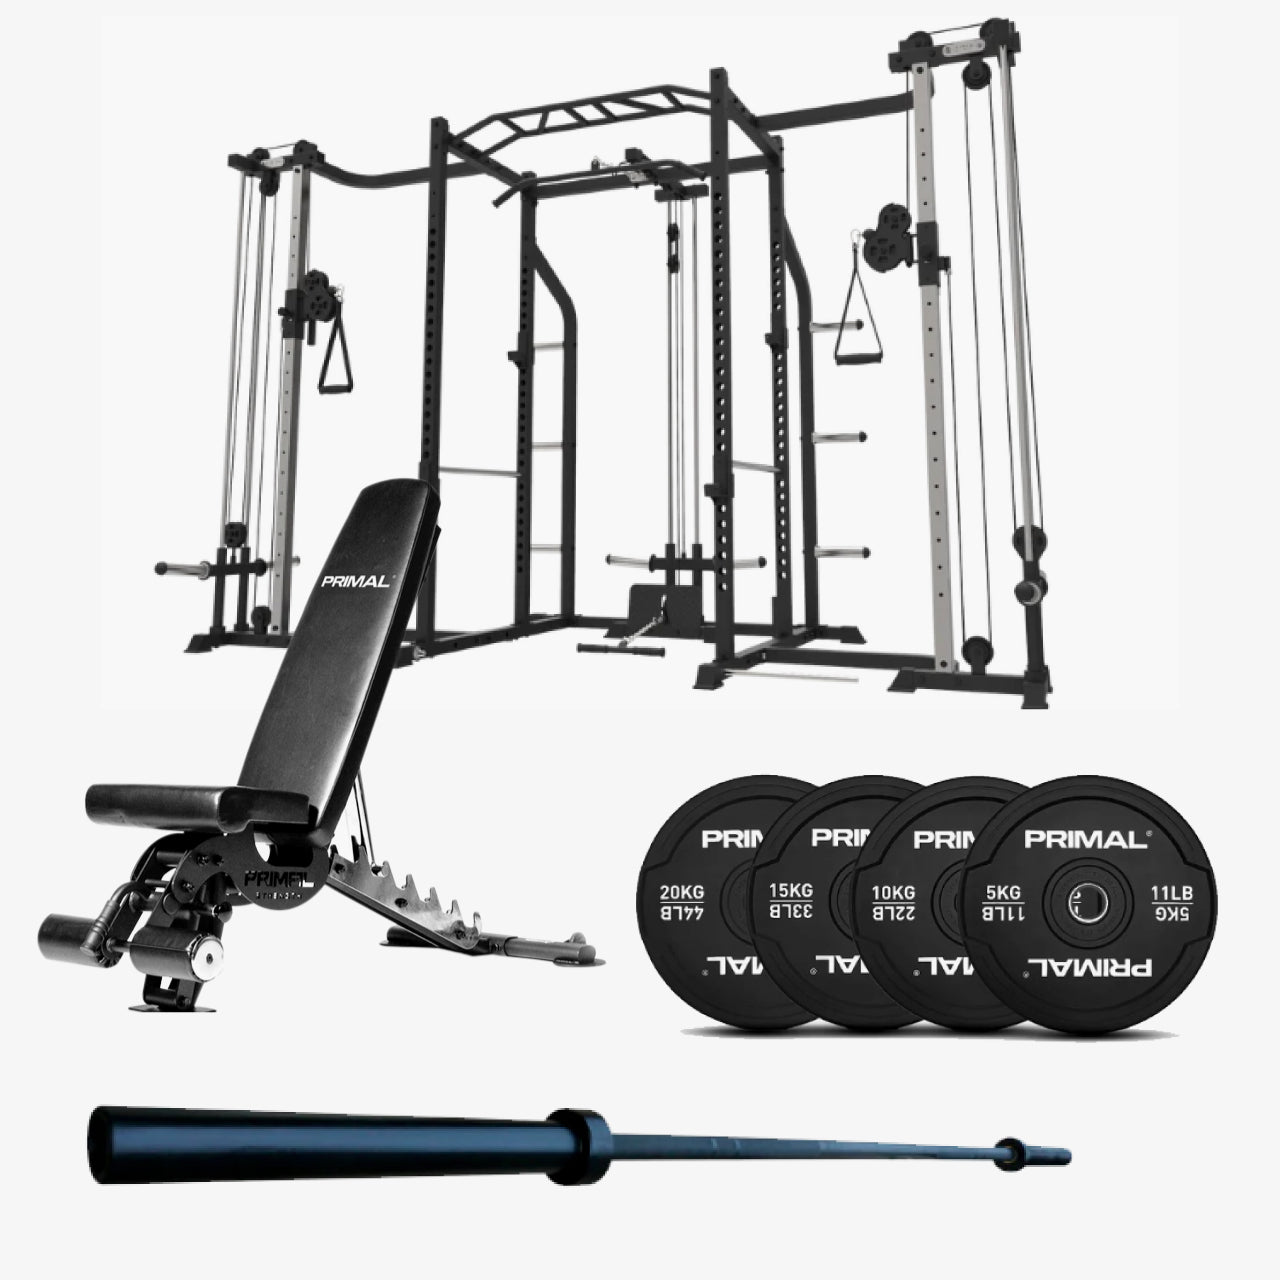 Primal Personal Series Ultimate Package with Cable Cross Lat Low, Bench and 120kg Bumper Set